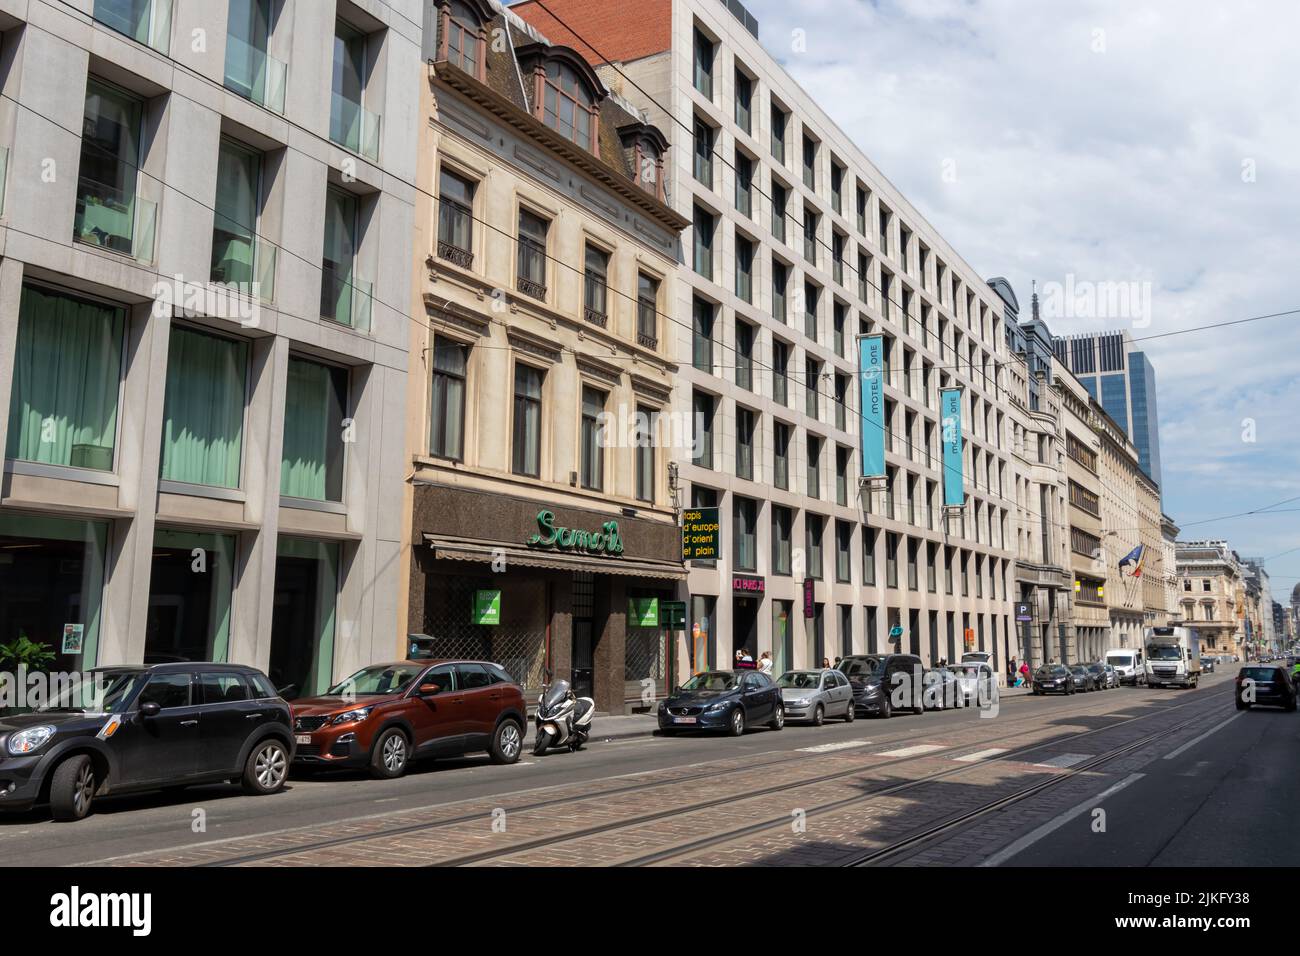 Brussels, Belgium - July 13, 2018: Rue Royale Stock Photo